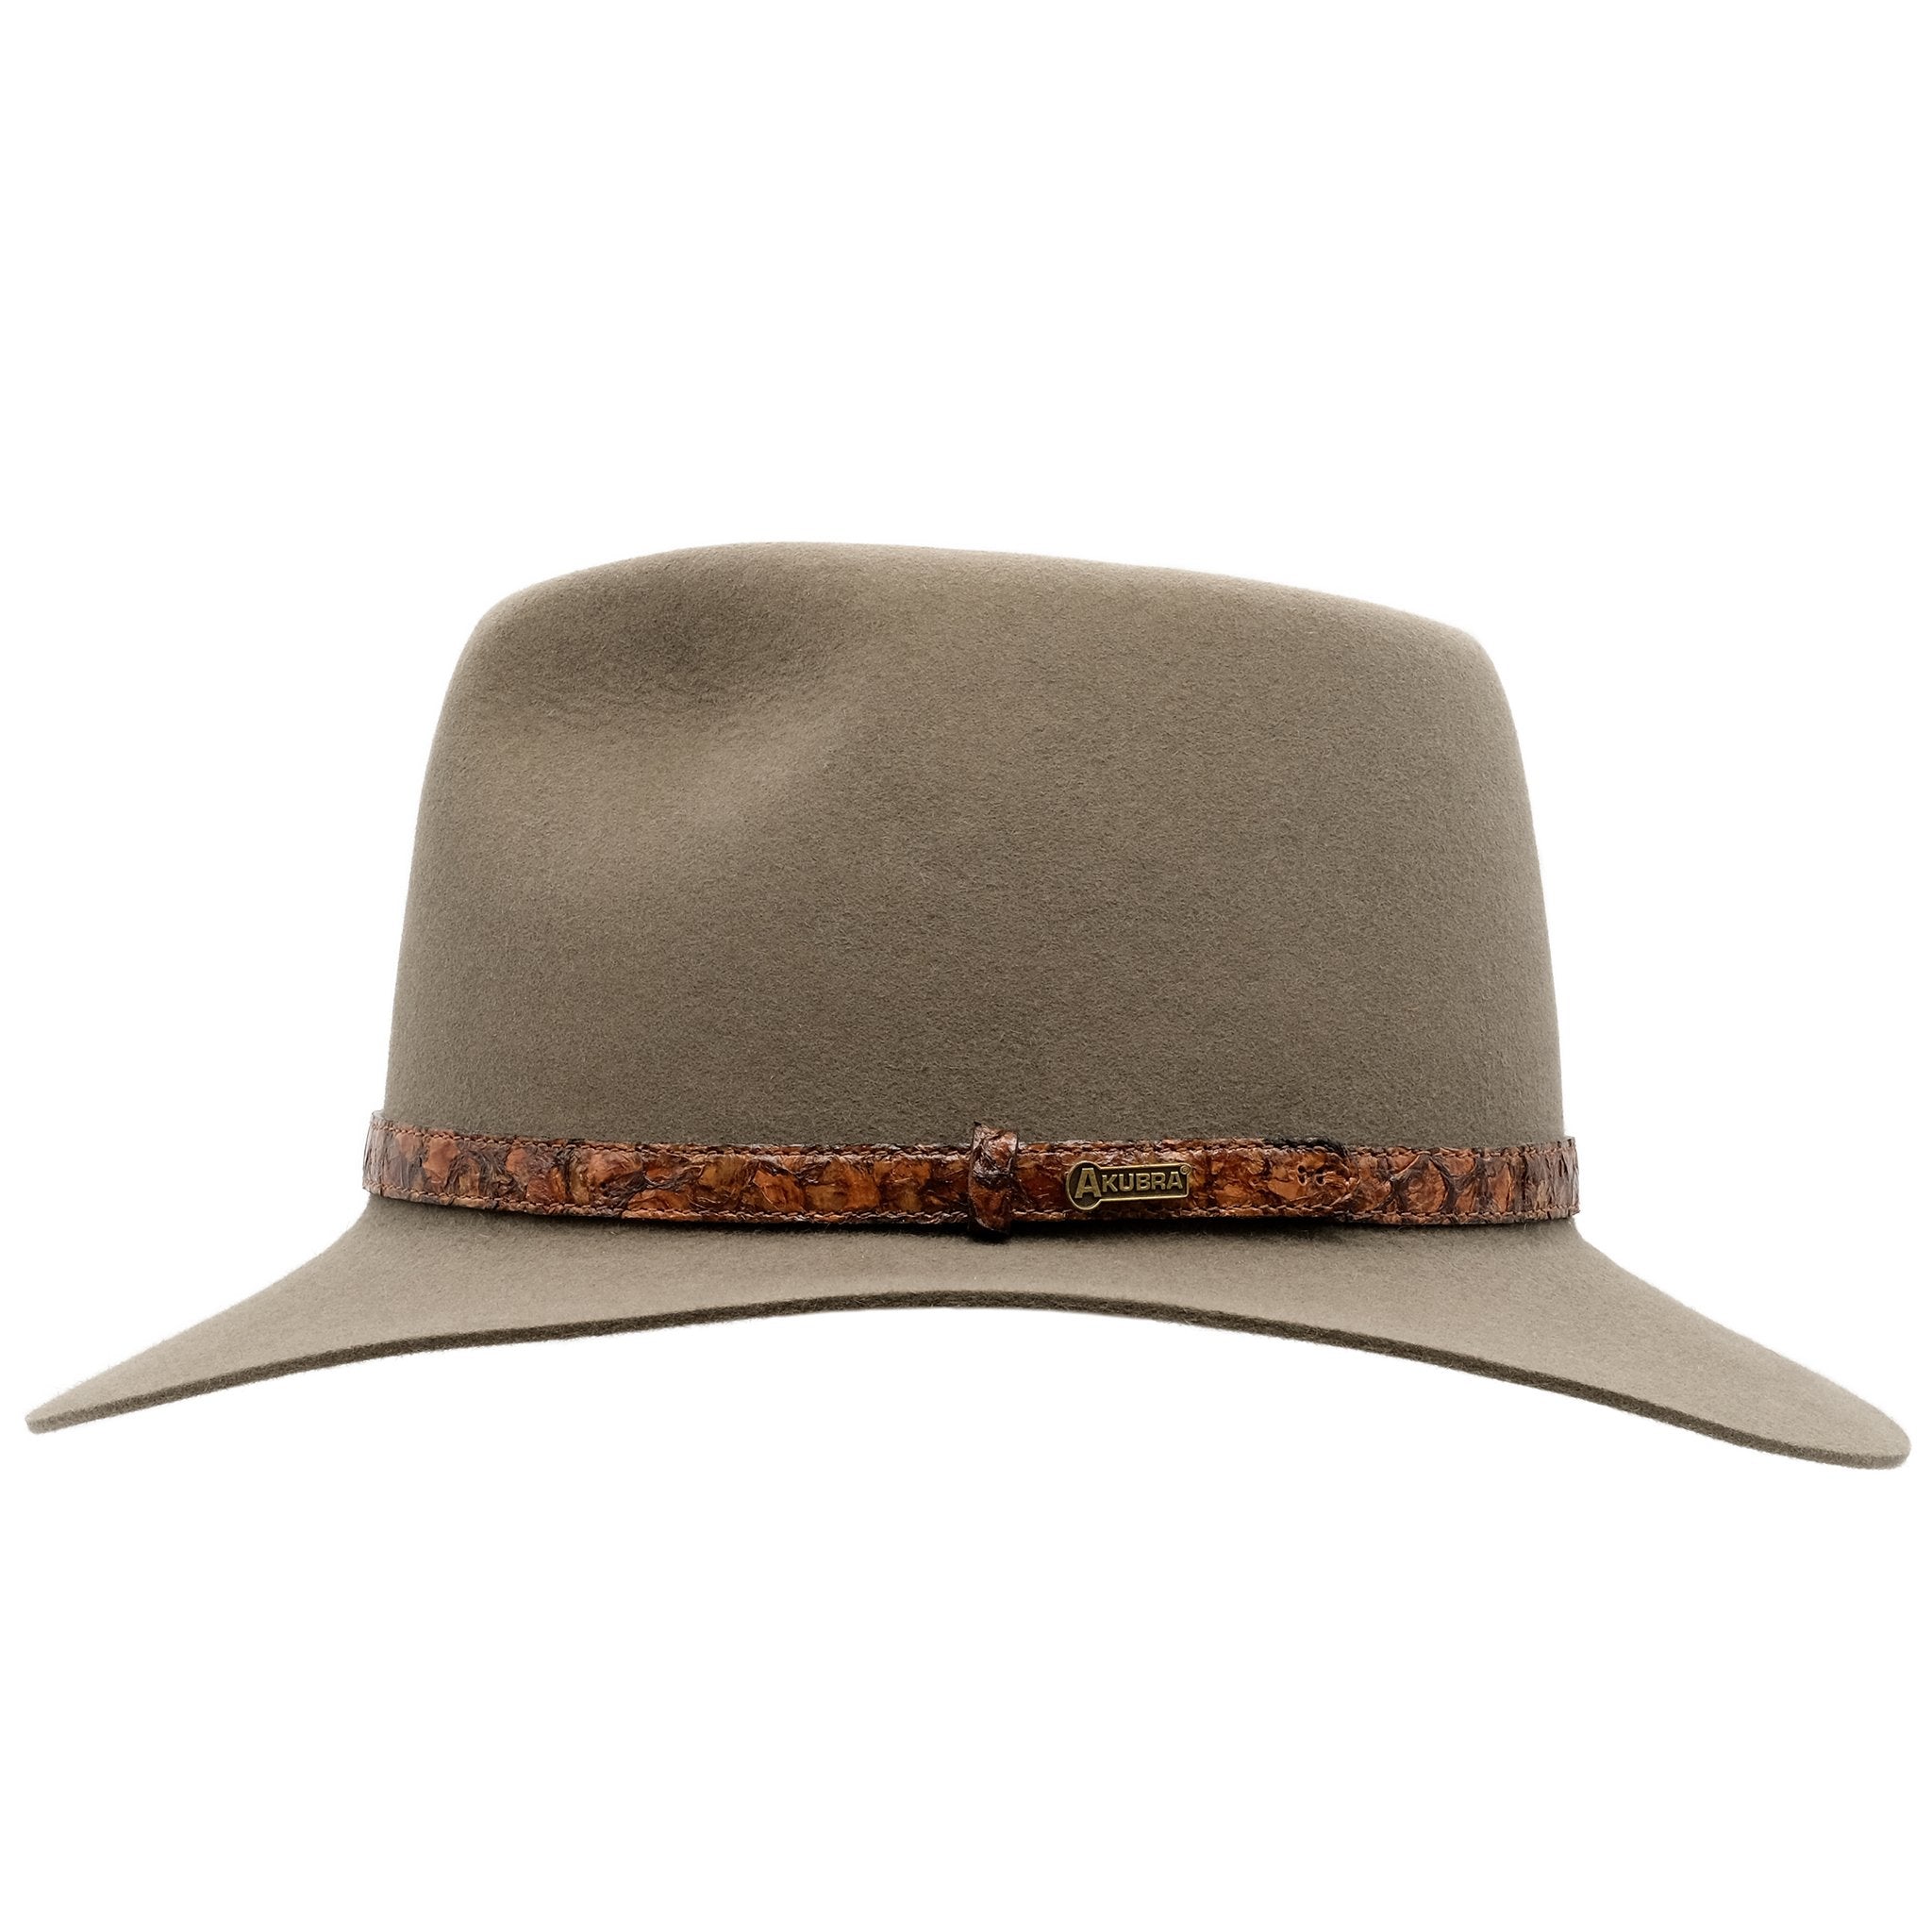 Side view of Akubra Banjo Paterson hat in Heritage Fawn colour